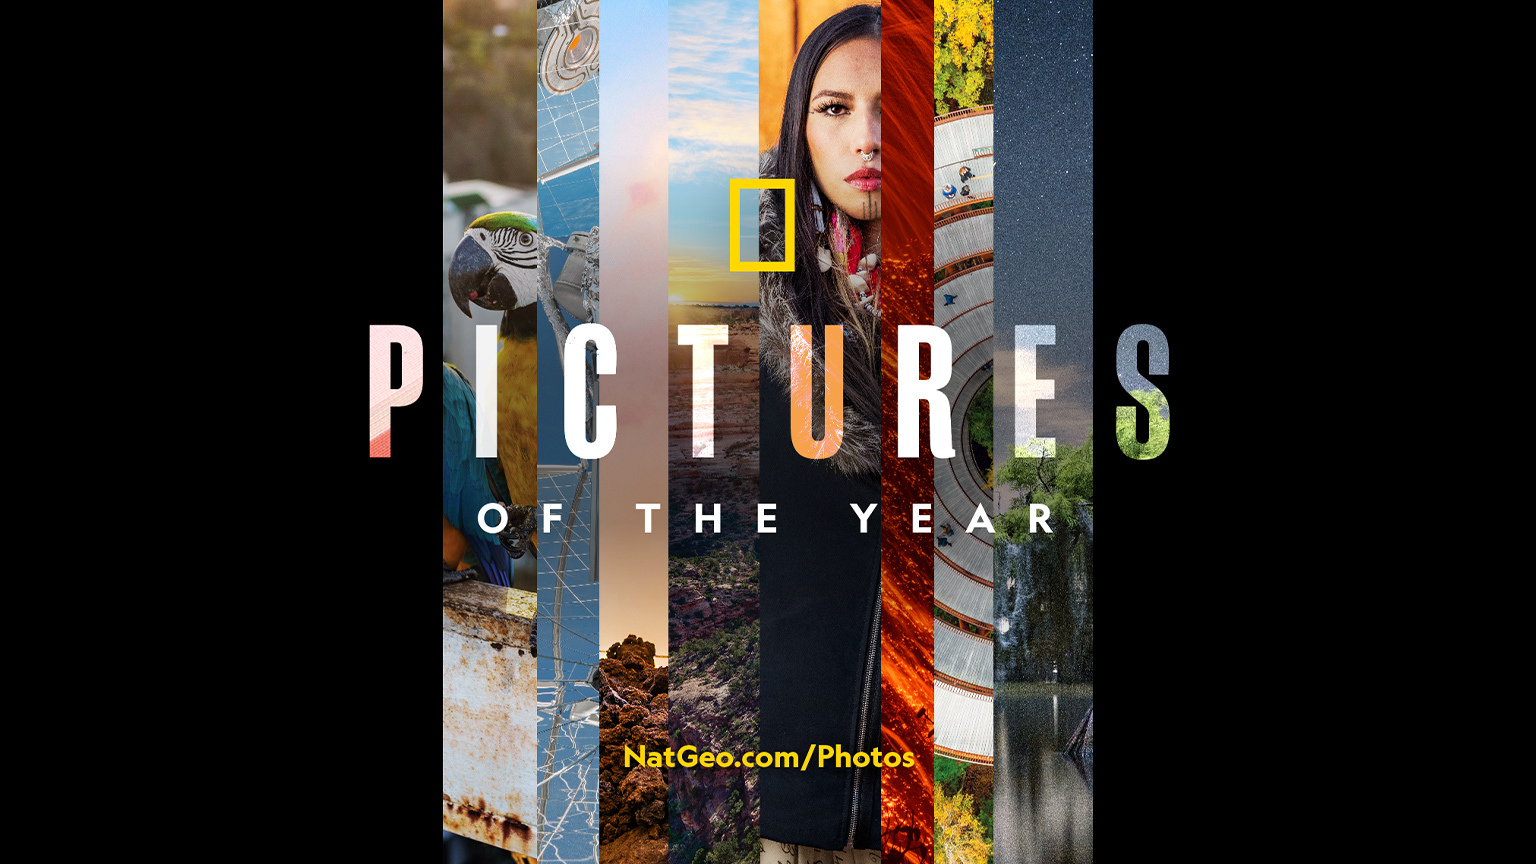 NATIONAL GEOGRAPHIC LAUNCHES PICTURES OF THE YEAR PHOTO CONTEST, INVITING ASPIRING PHOTOGRAPHERS TO SHOW THE WORLD AROUND THEM